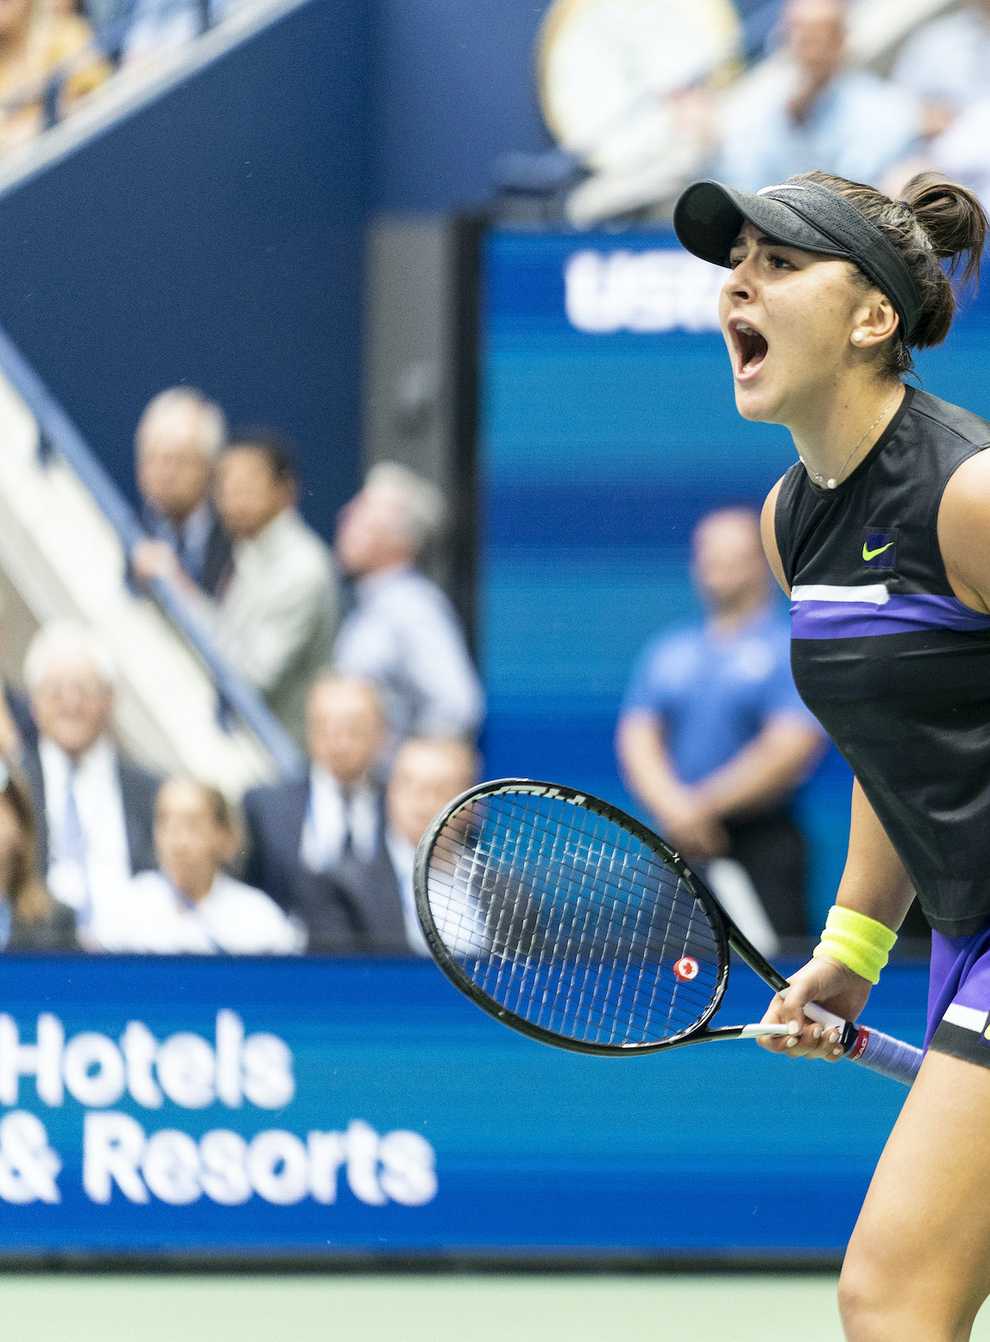 The Canadian won her first Grand Slam title at the US Open in 2019